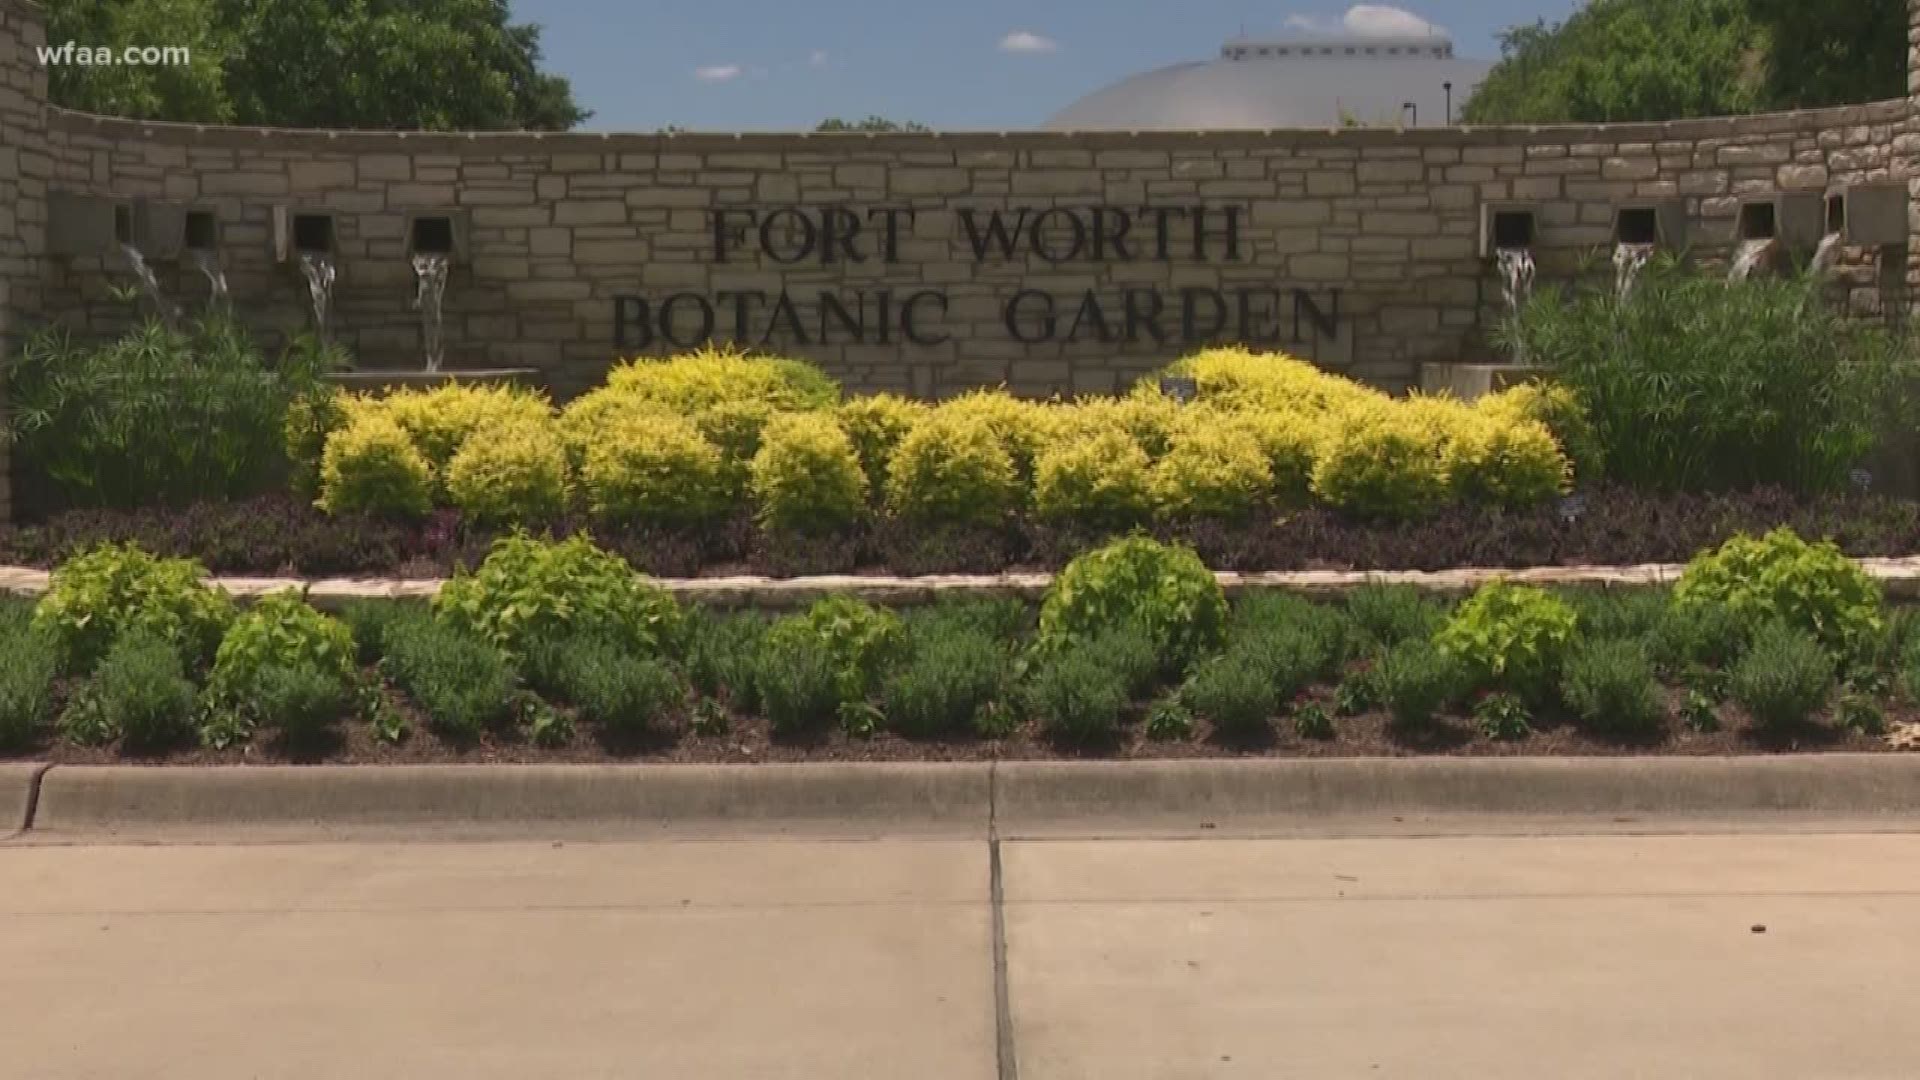 Five Ways To Get Around New Admission Charges At Fort Worth